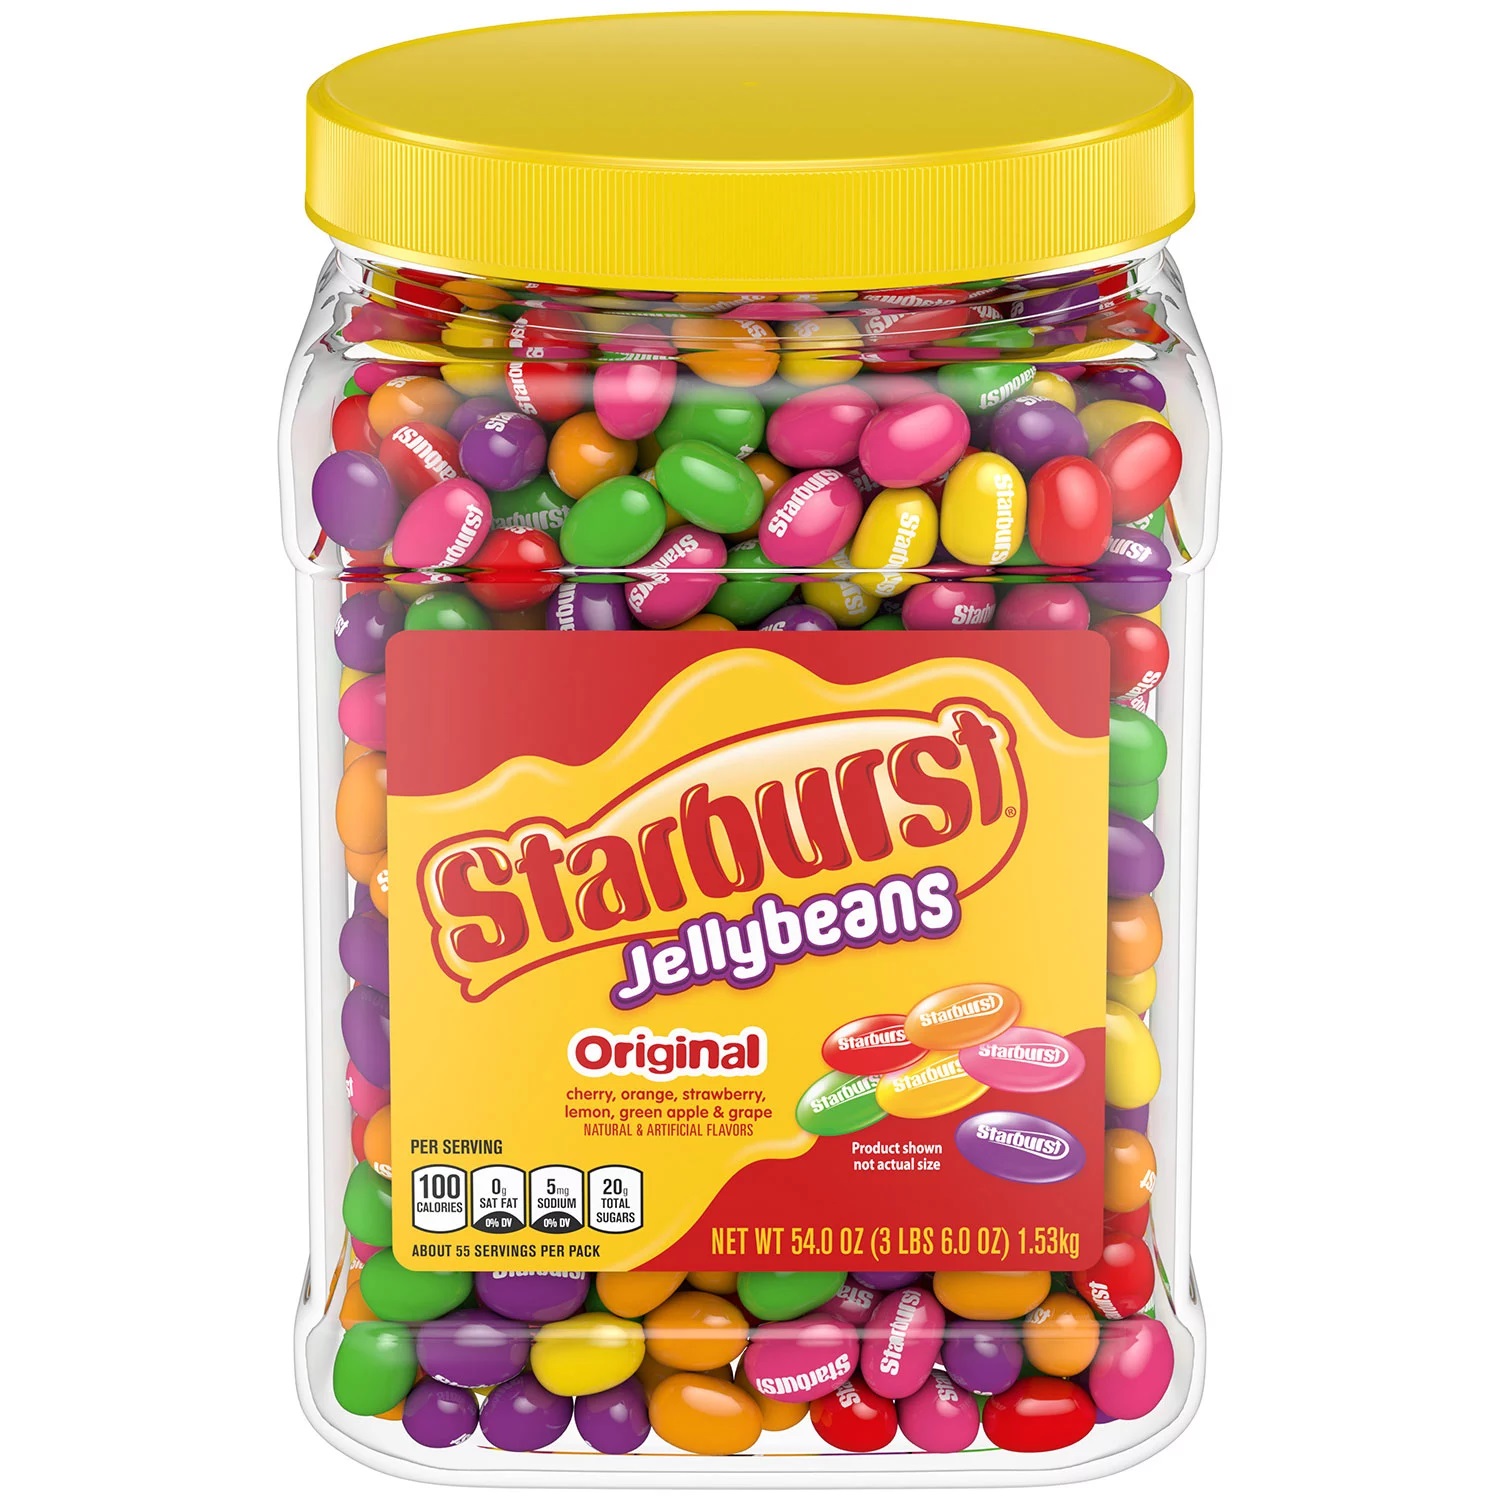 Starburst Original Assorted Jelly Beans Chewy Candy Resealable Jar (54 oz.) - image 1 of 2